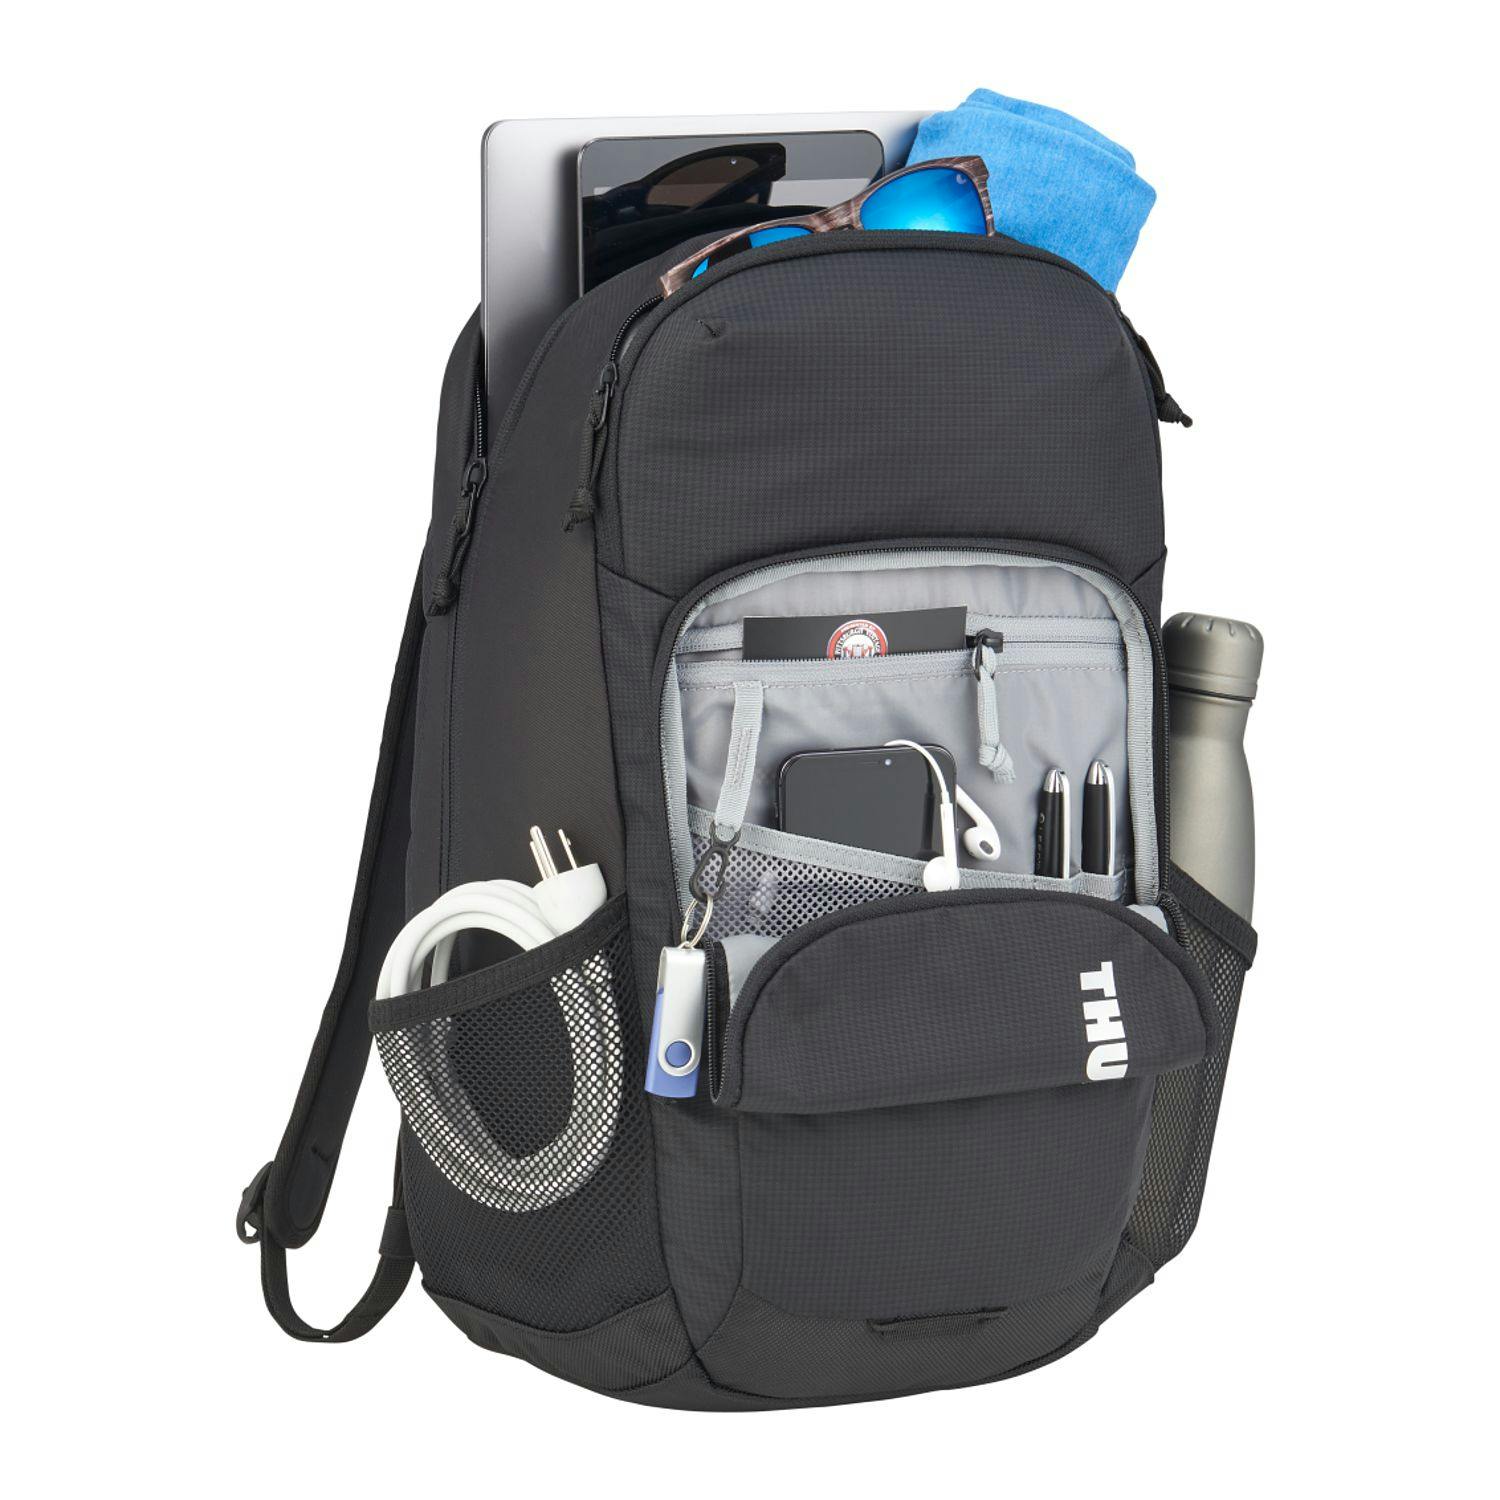 Thule Achiever 15" Computer Backpack - additional Image 2